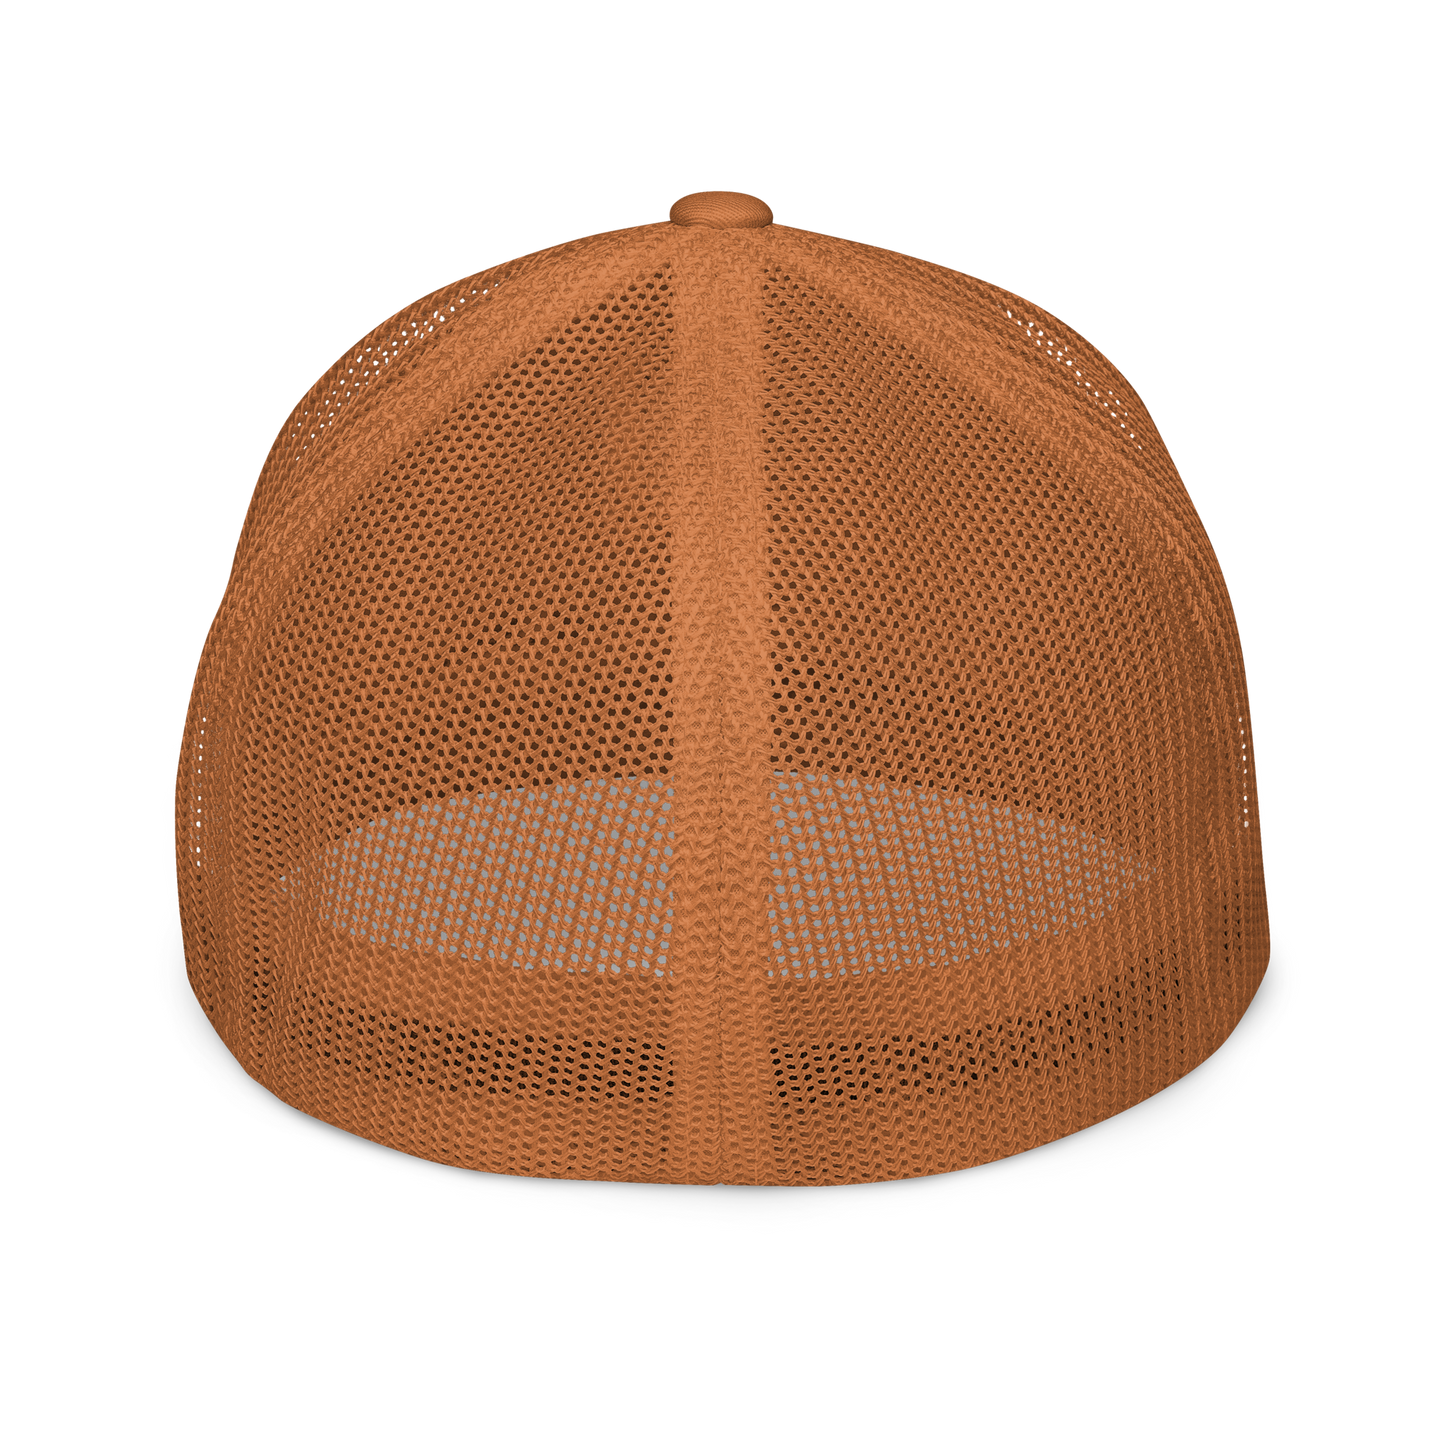 FitBirdie Closed-back Trucker Golf Hat - Bronze (LIMITED EDITION)